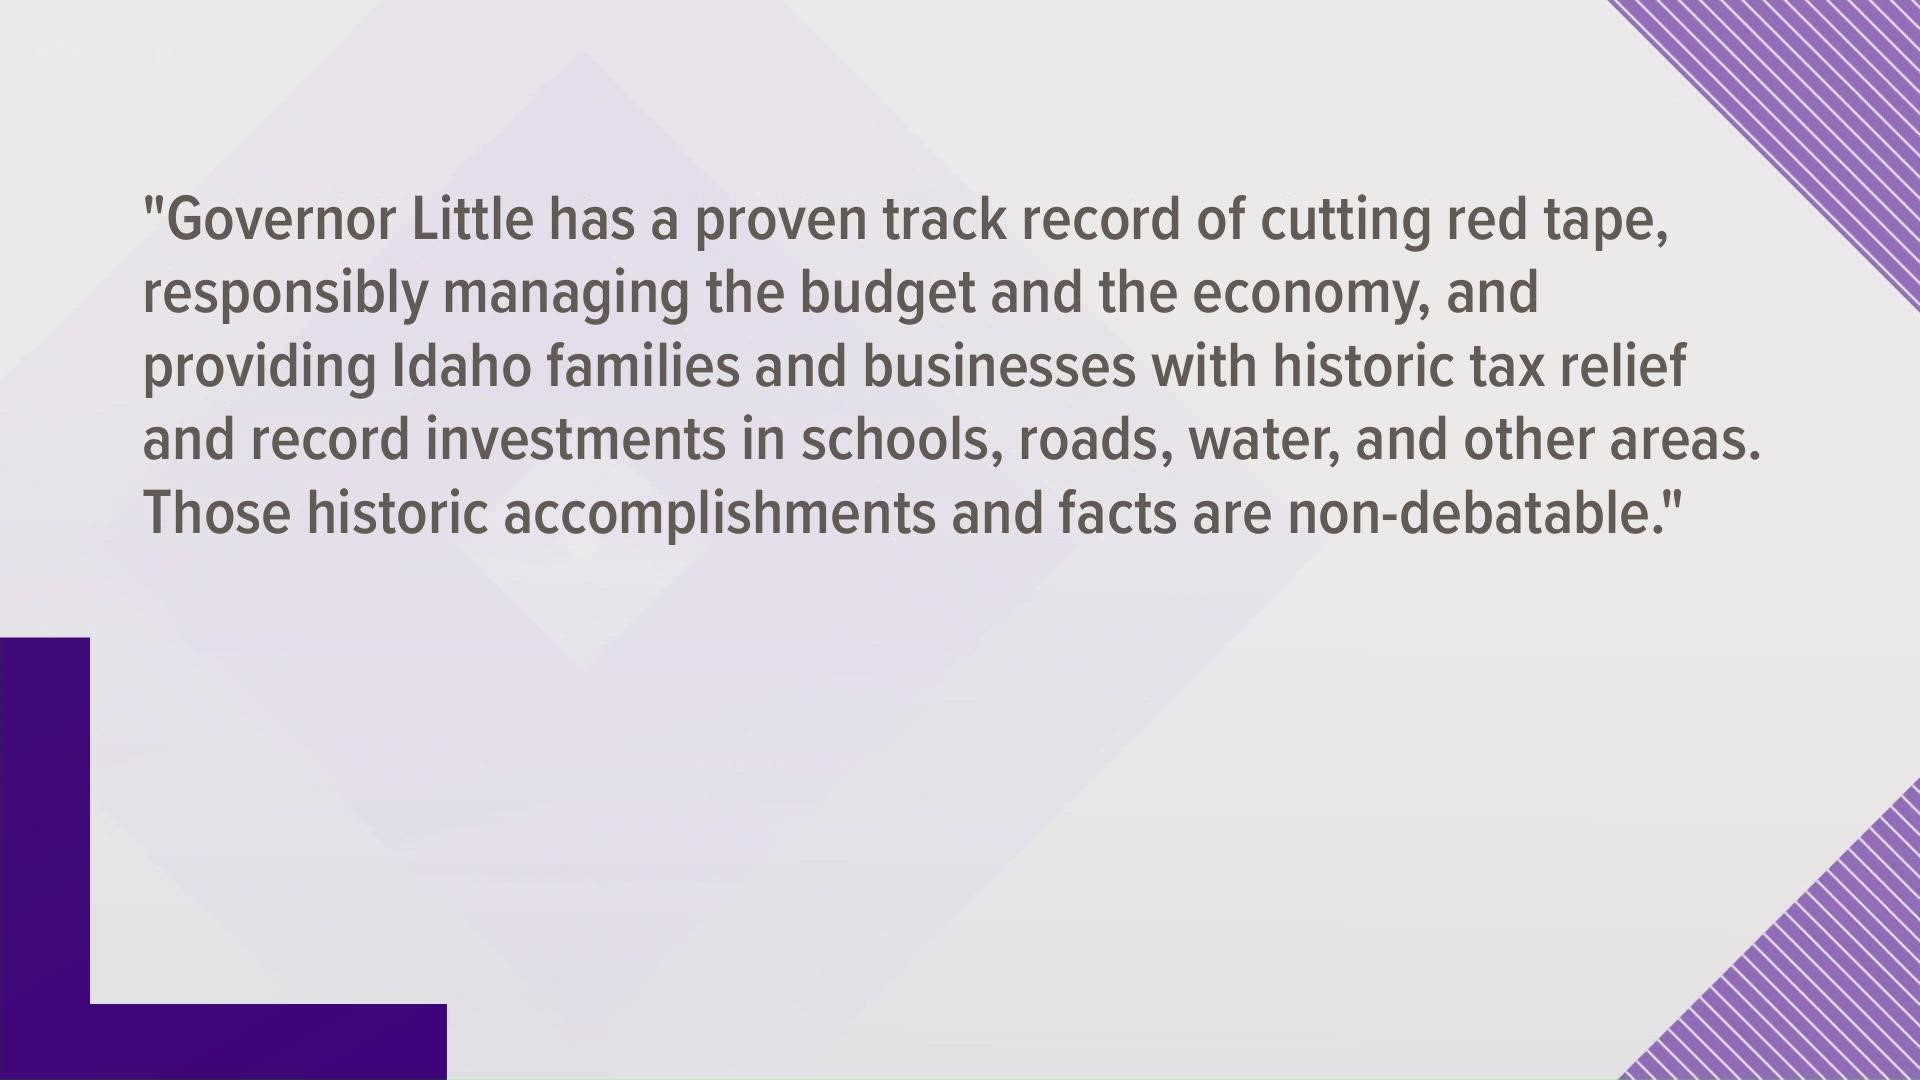 Ahead of Idaho's May 17 primary election, Gov. Brad Little confirmed to KTVB on Friday that he will not be participating in any debate for governor of the Gem State.